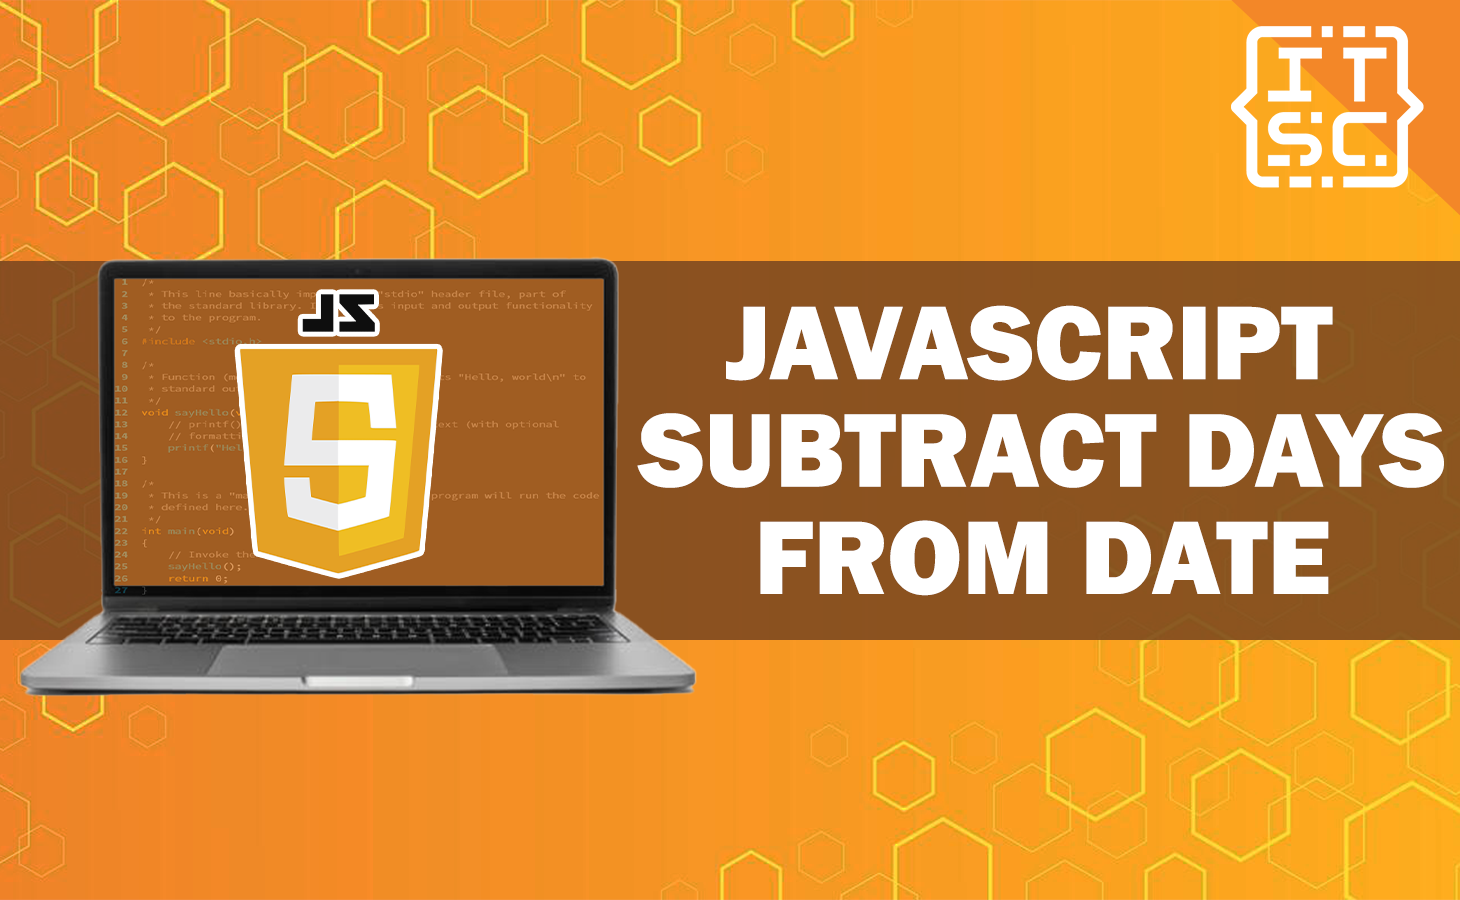 How to subtract days from date in JavaScript?